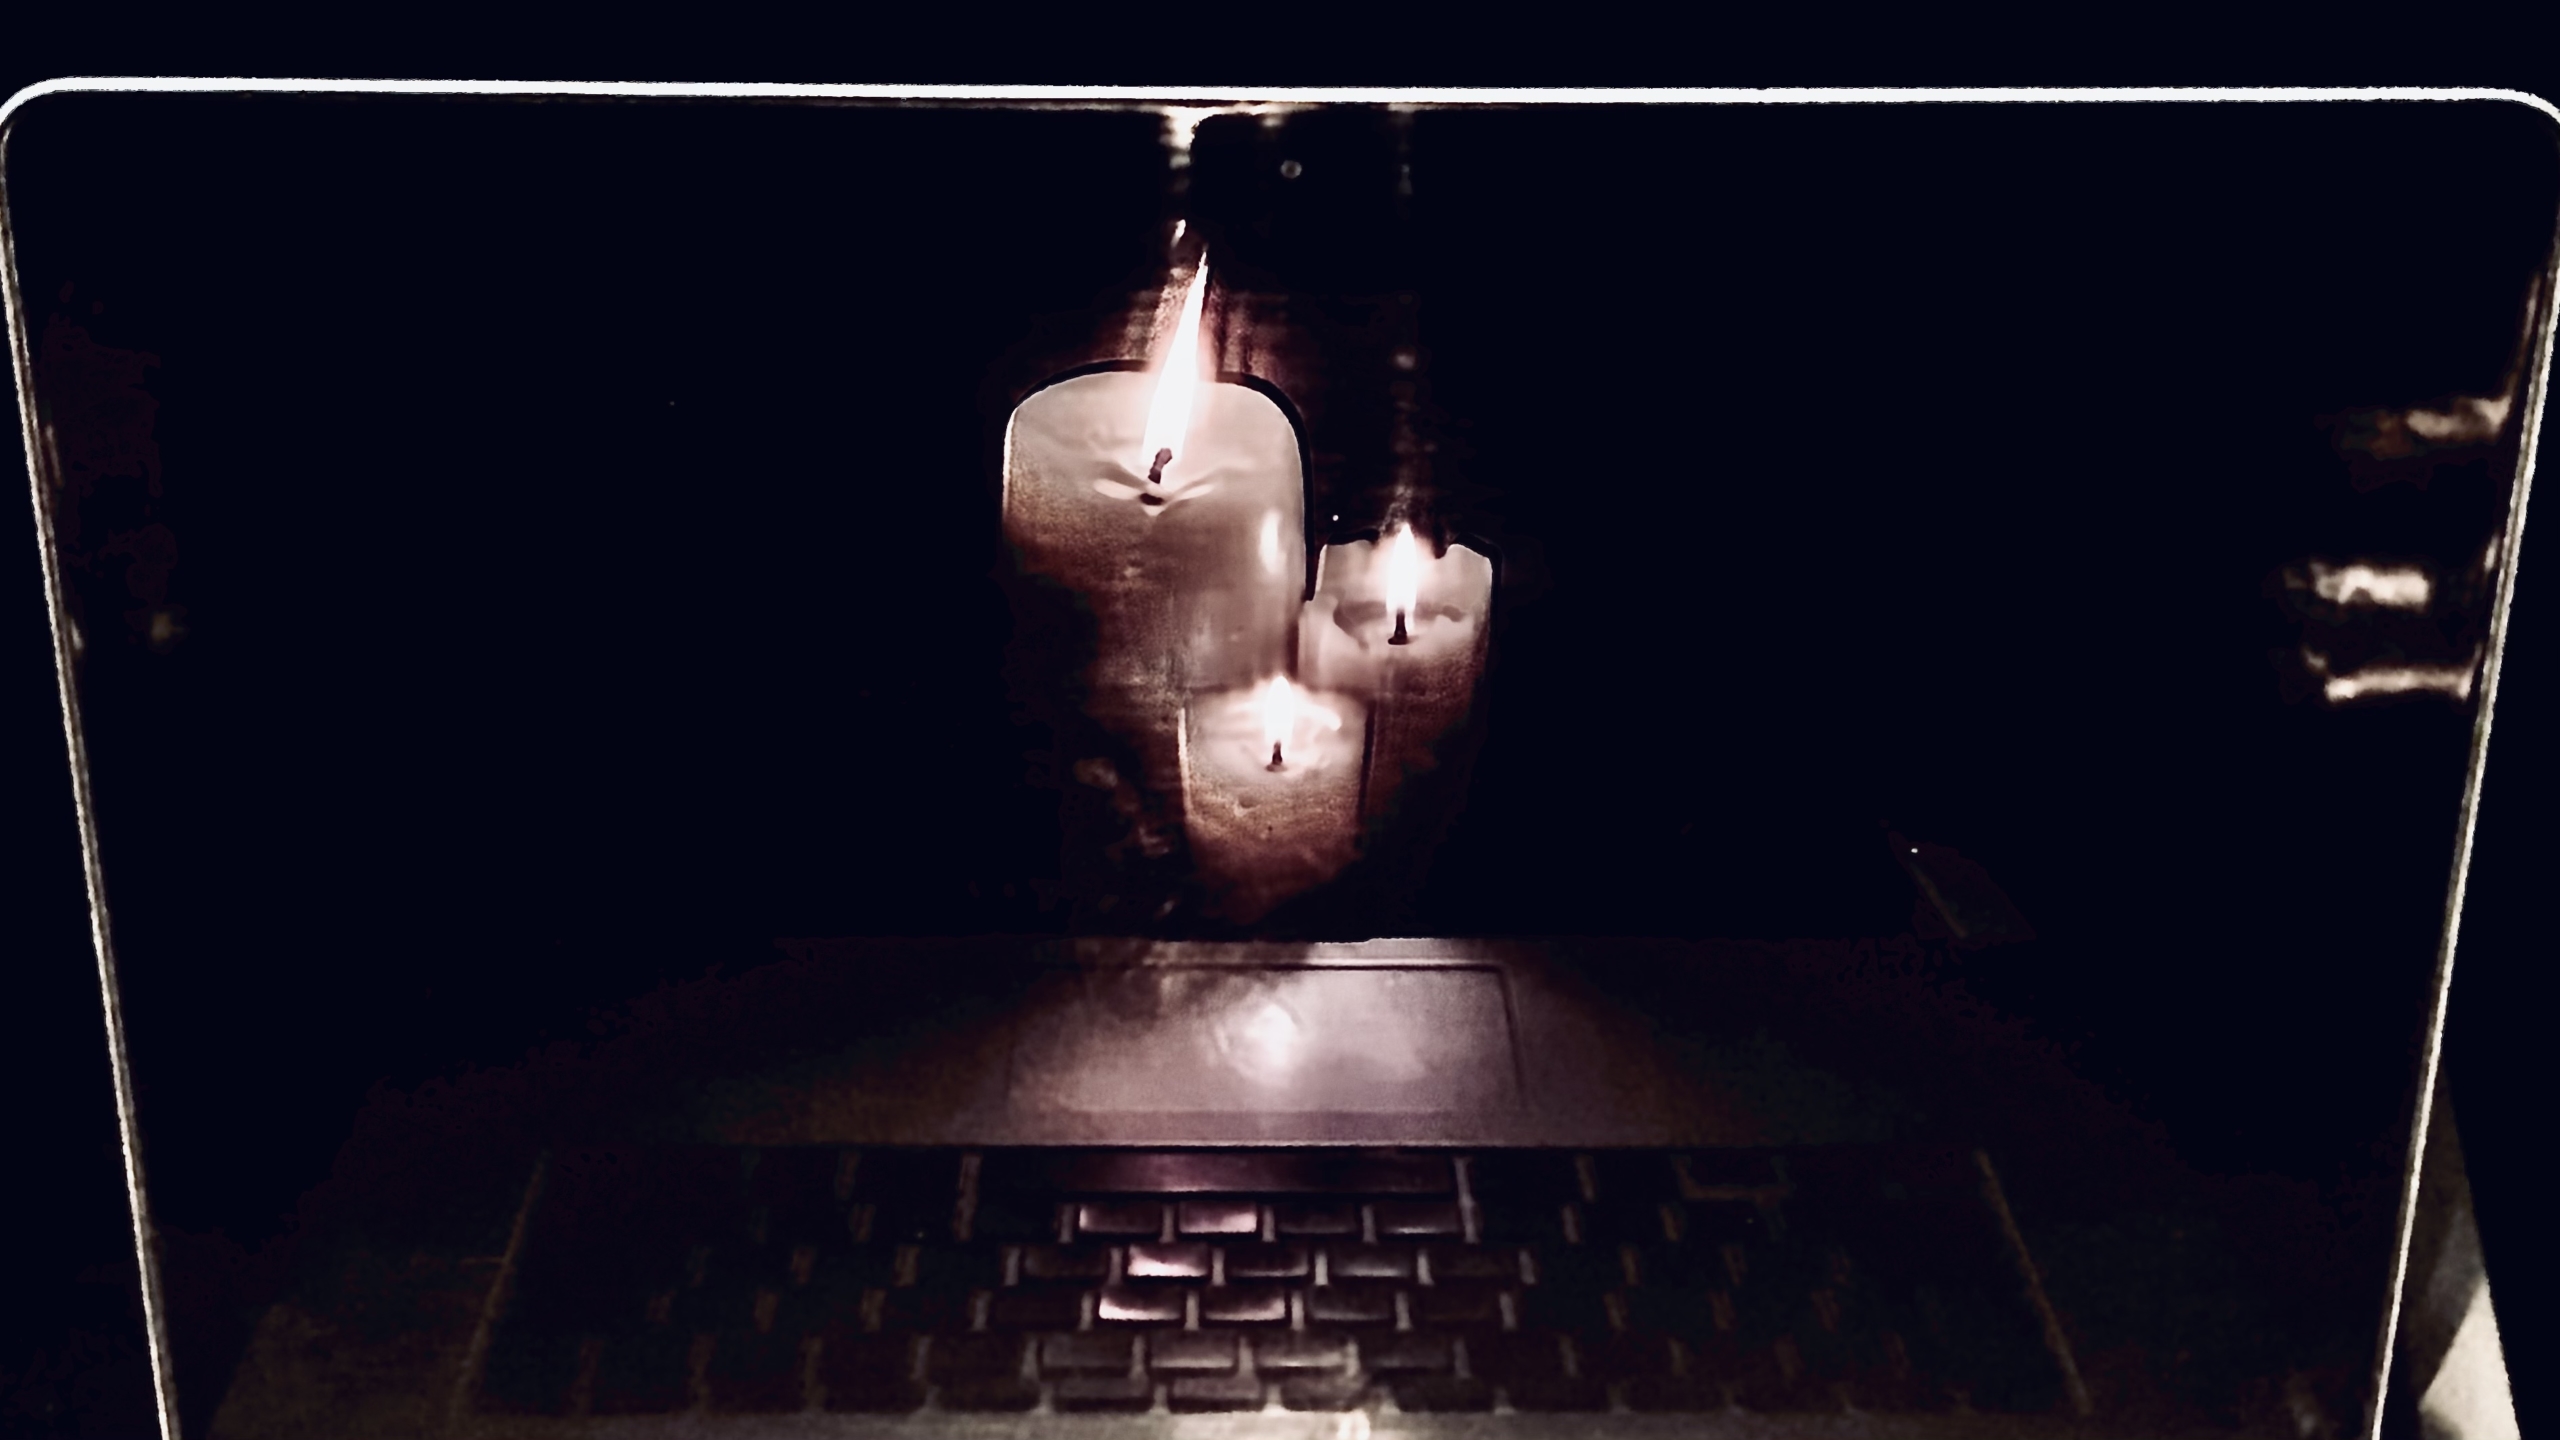 Candles mirrored in a computer screen